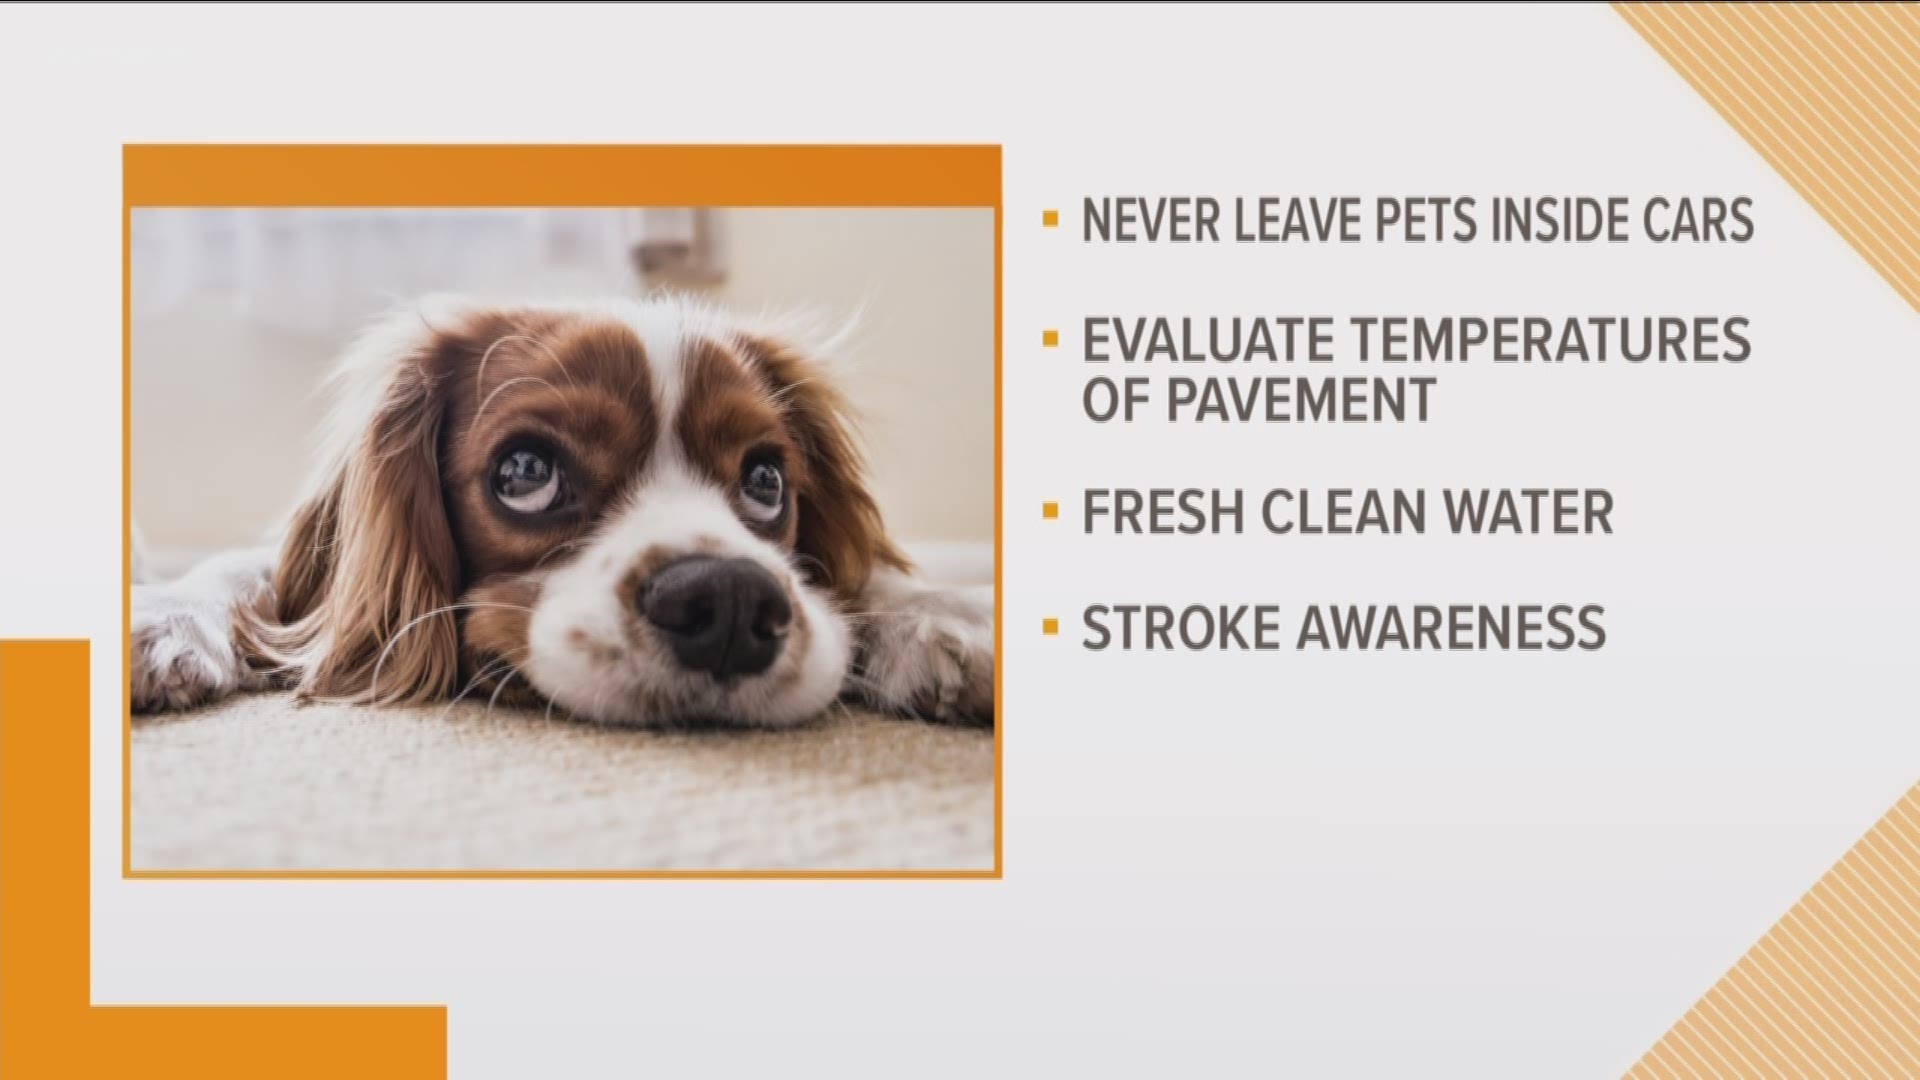 Pets don't cool off the same way you do. Dr. Heidi Patterson, from the SouthCare Animal Medical Center, is sharing tips to help prevent heat related injuries and illnesses.